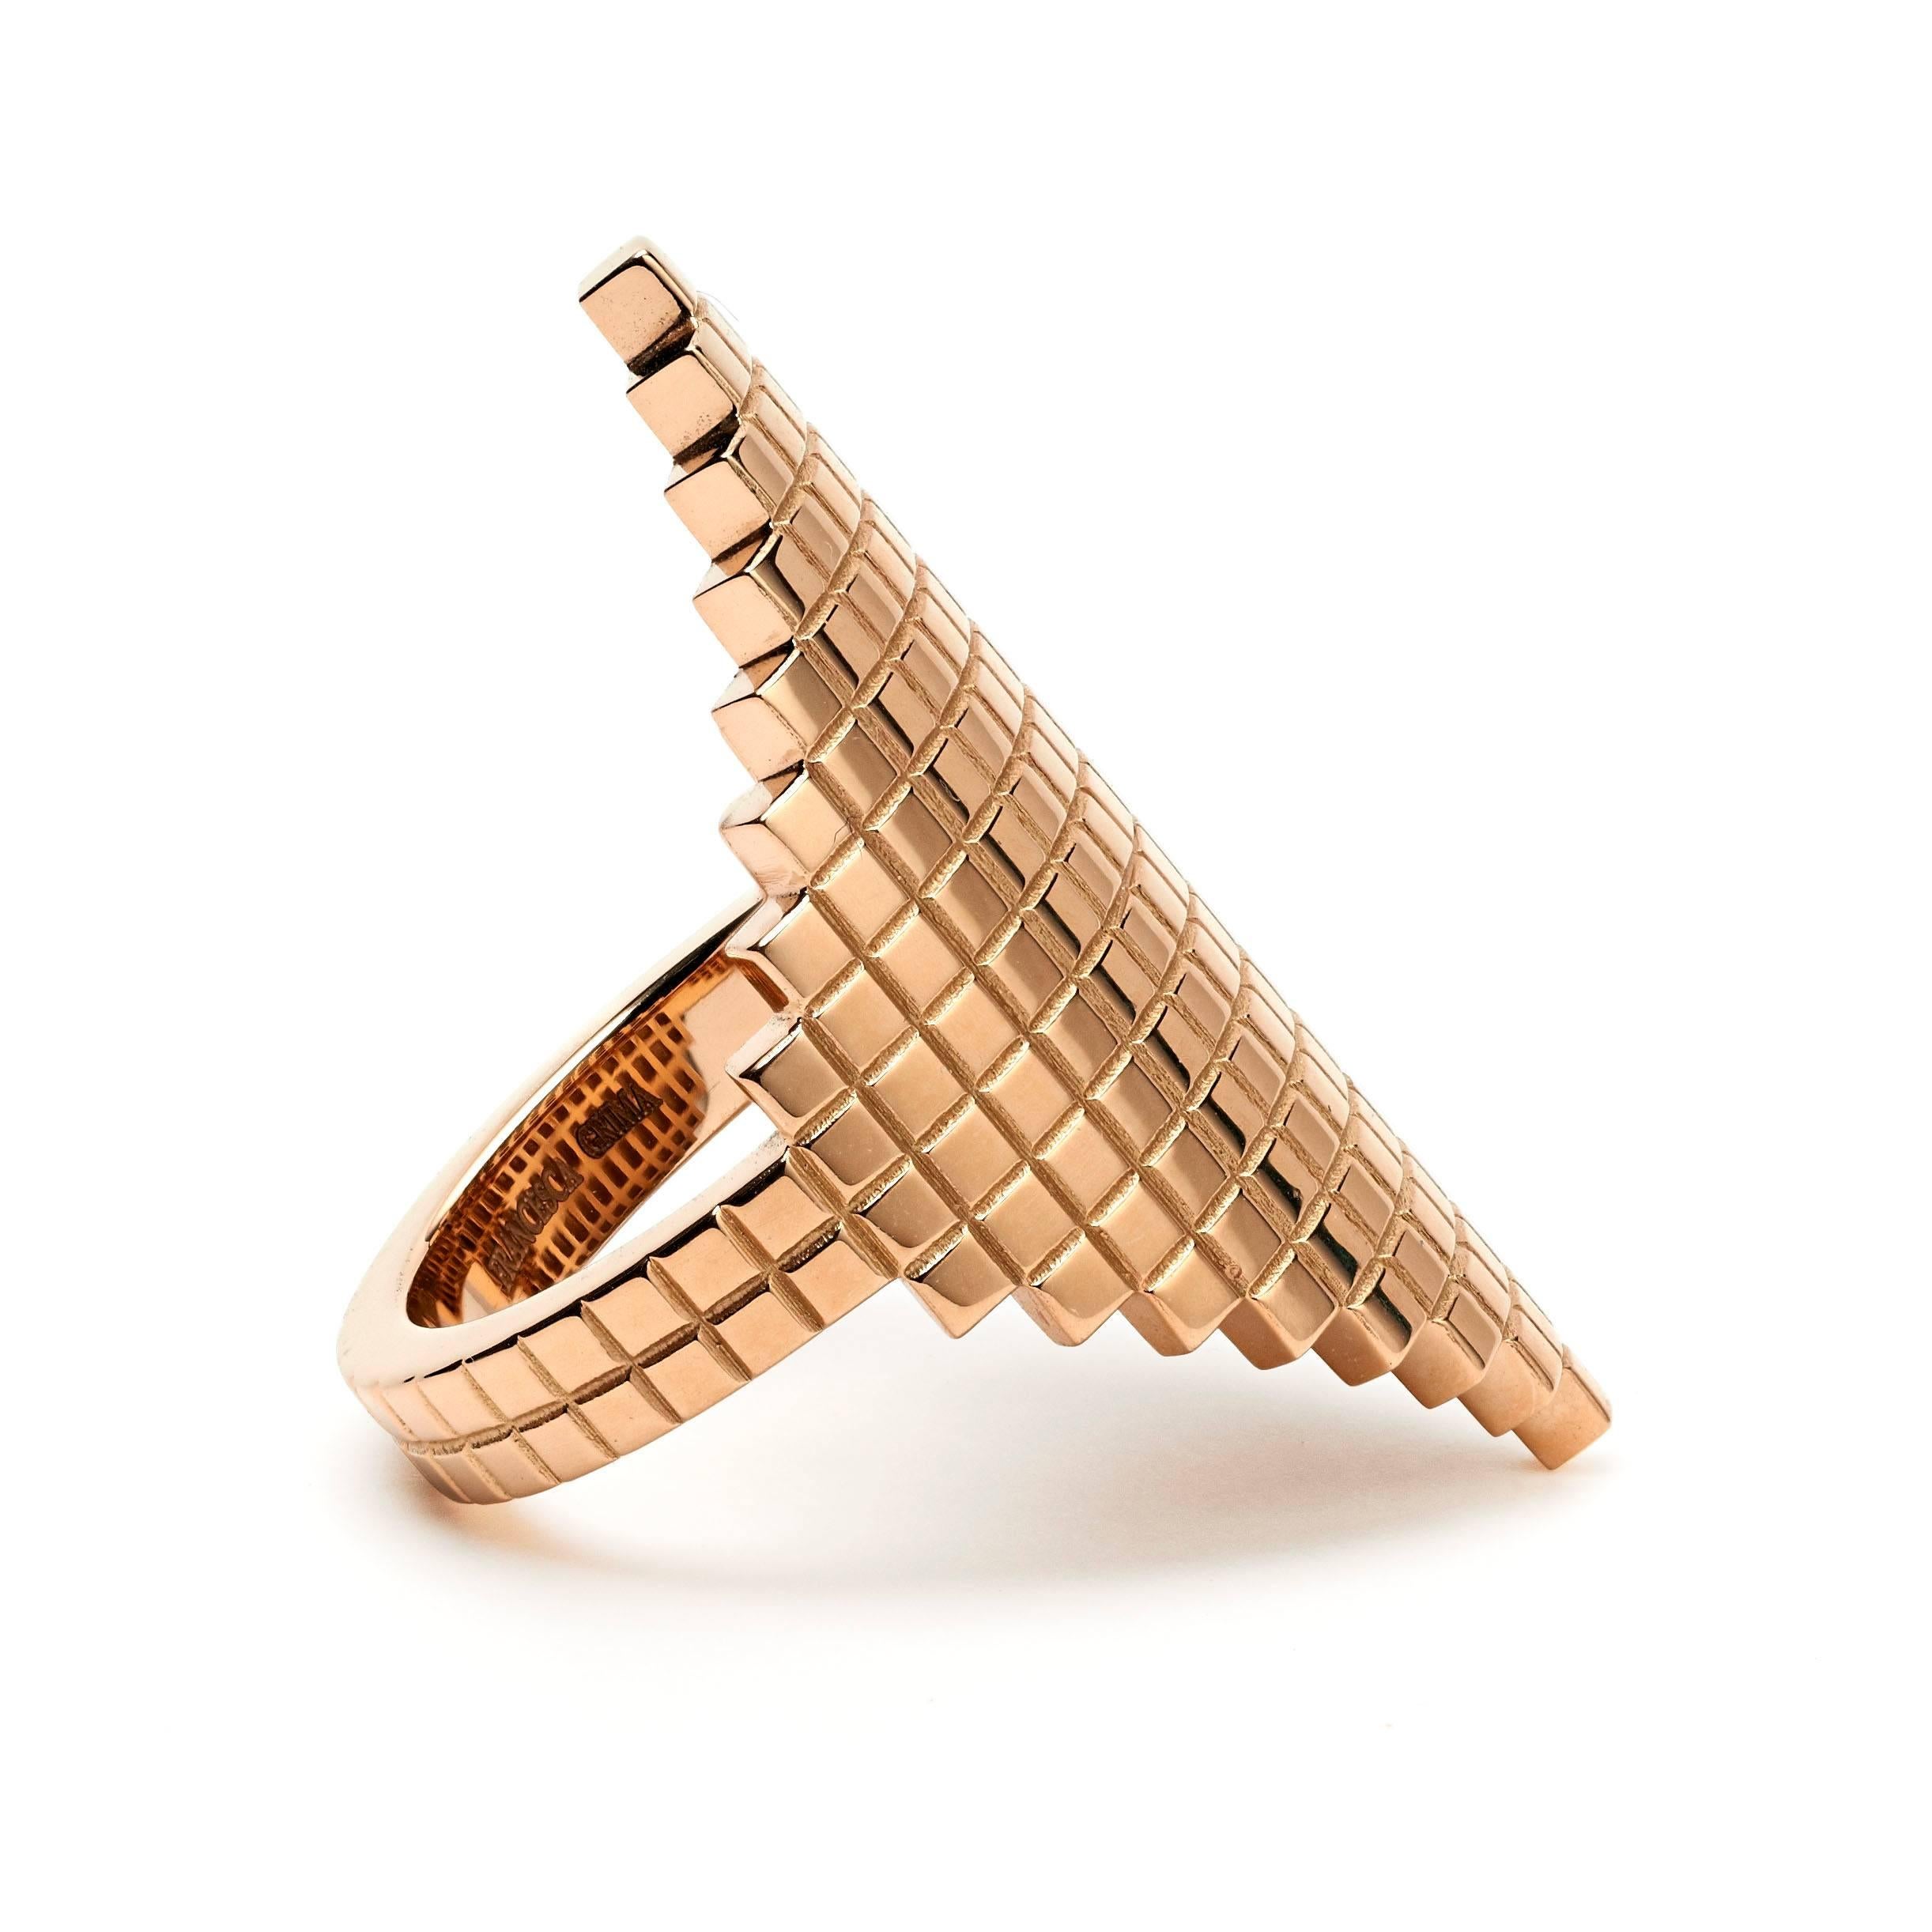 "Long Pixel Ring" by Francesca Grima in 18ct. Rose Gold. 

French Size 55.5  UK Size O 1/2  US Size 7 1/2

Signed Francesca Grima, London Hallmarks 

About Francesca Grima 
Born into a family that has a long tradition in fine jewellery –